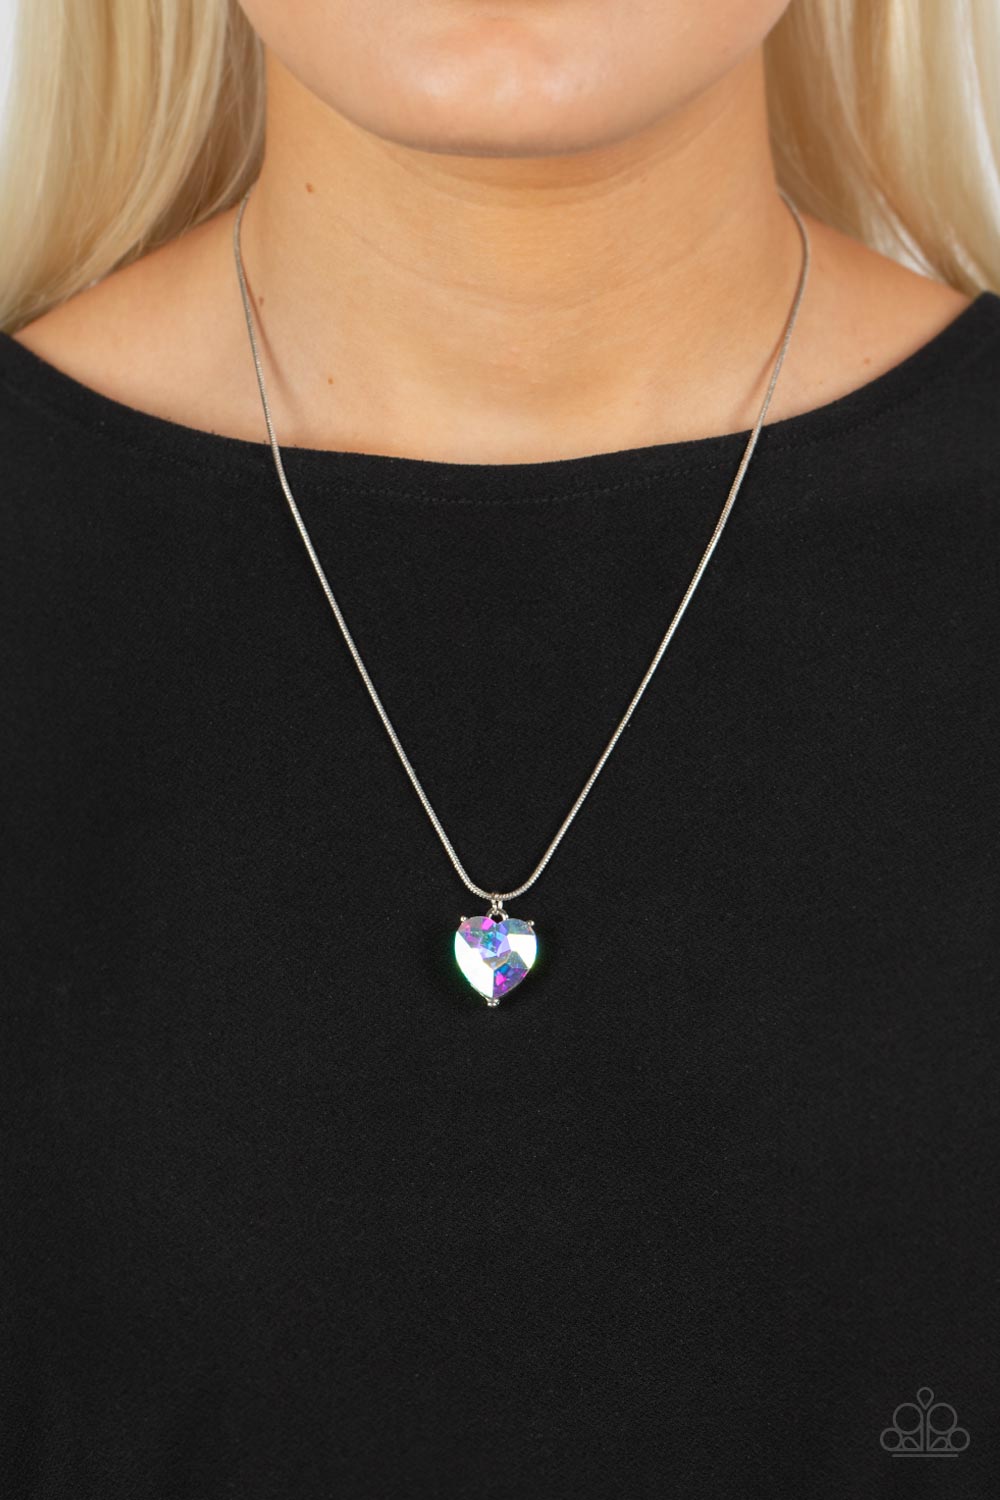 Paparazzi Accessories Smitten with Style - Multi A heart-shaped rhinestone brushed in a reflective iridescent finish sparkles brilliantly as it slides along a skinny silver snake chain. The gem is pressed into a thick silver frame, allowing its faceted su